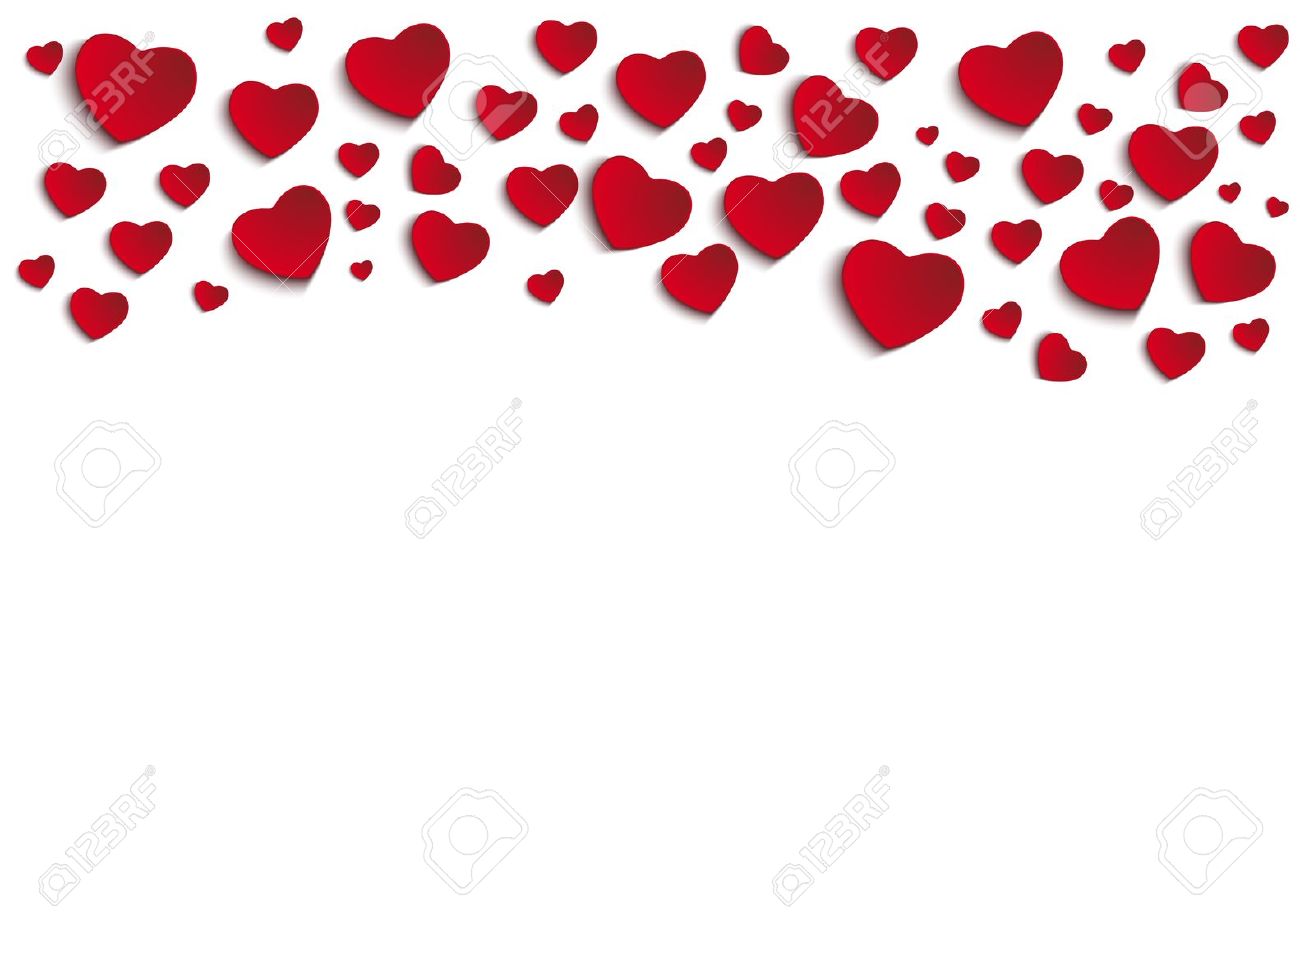 Free Printable Valentines Day Clipart at GetDrawings.com | Free for personal use Free ...1300 x 975